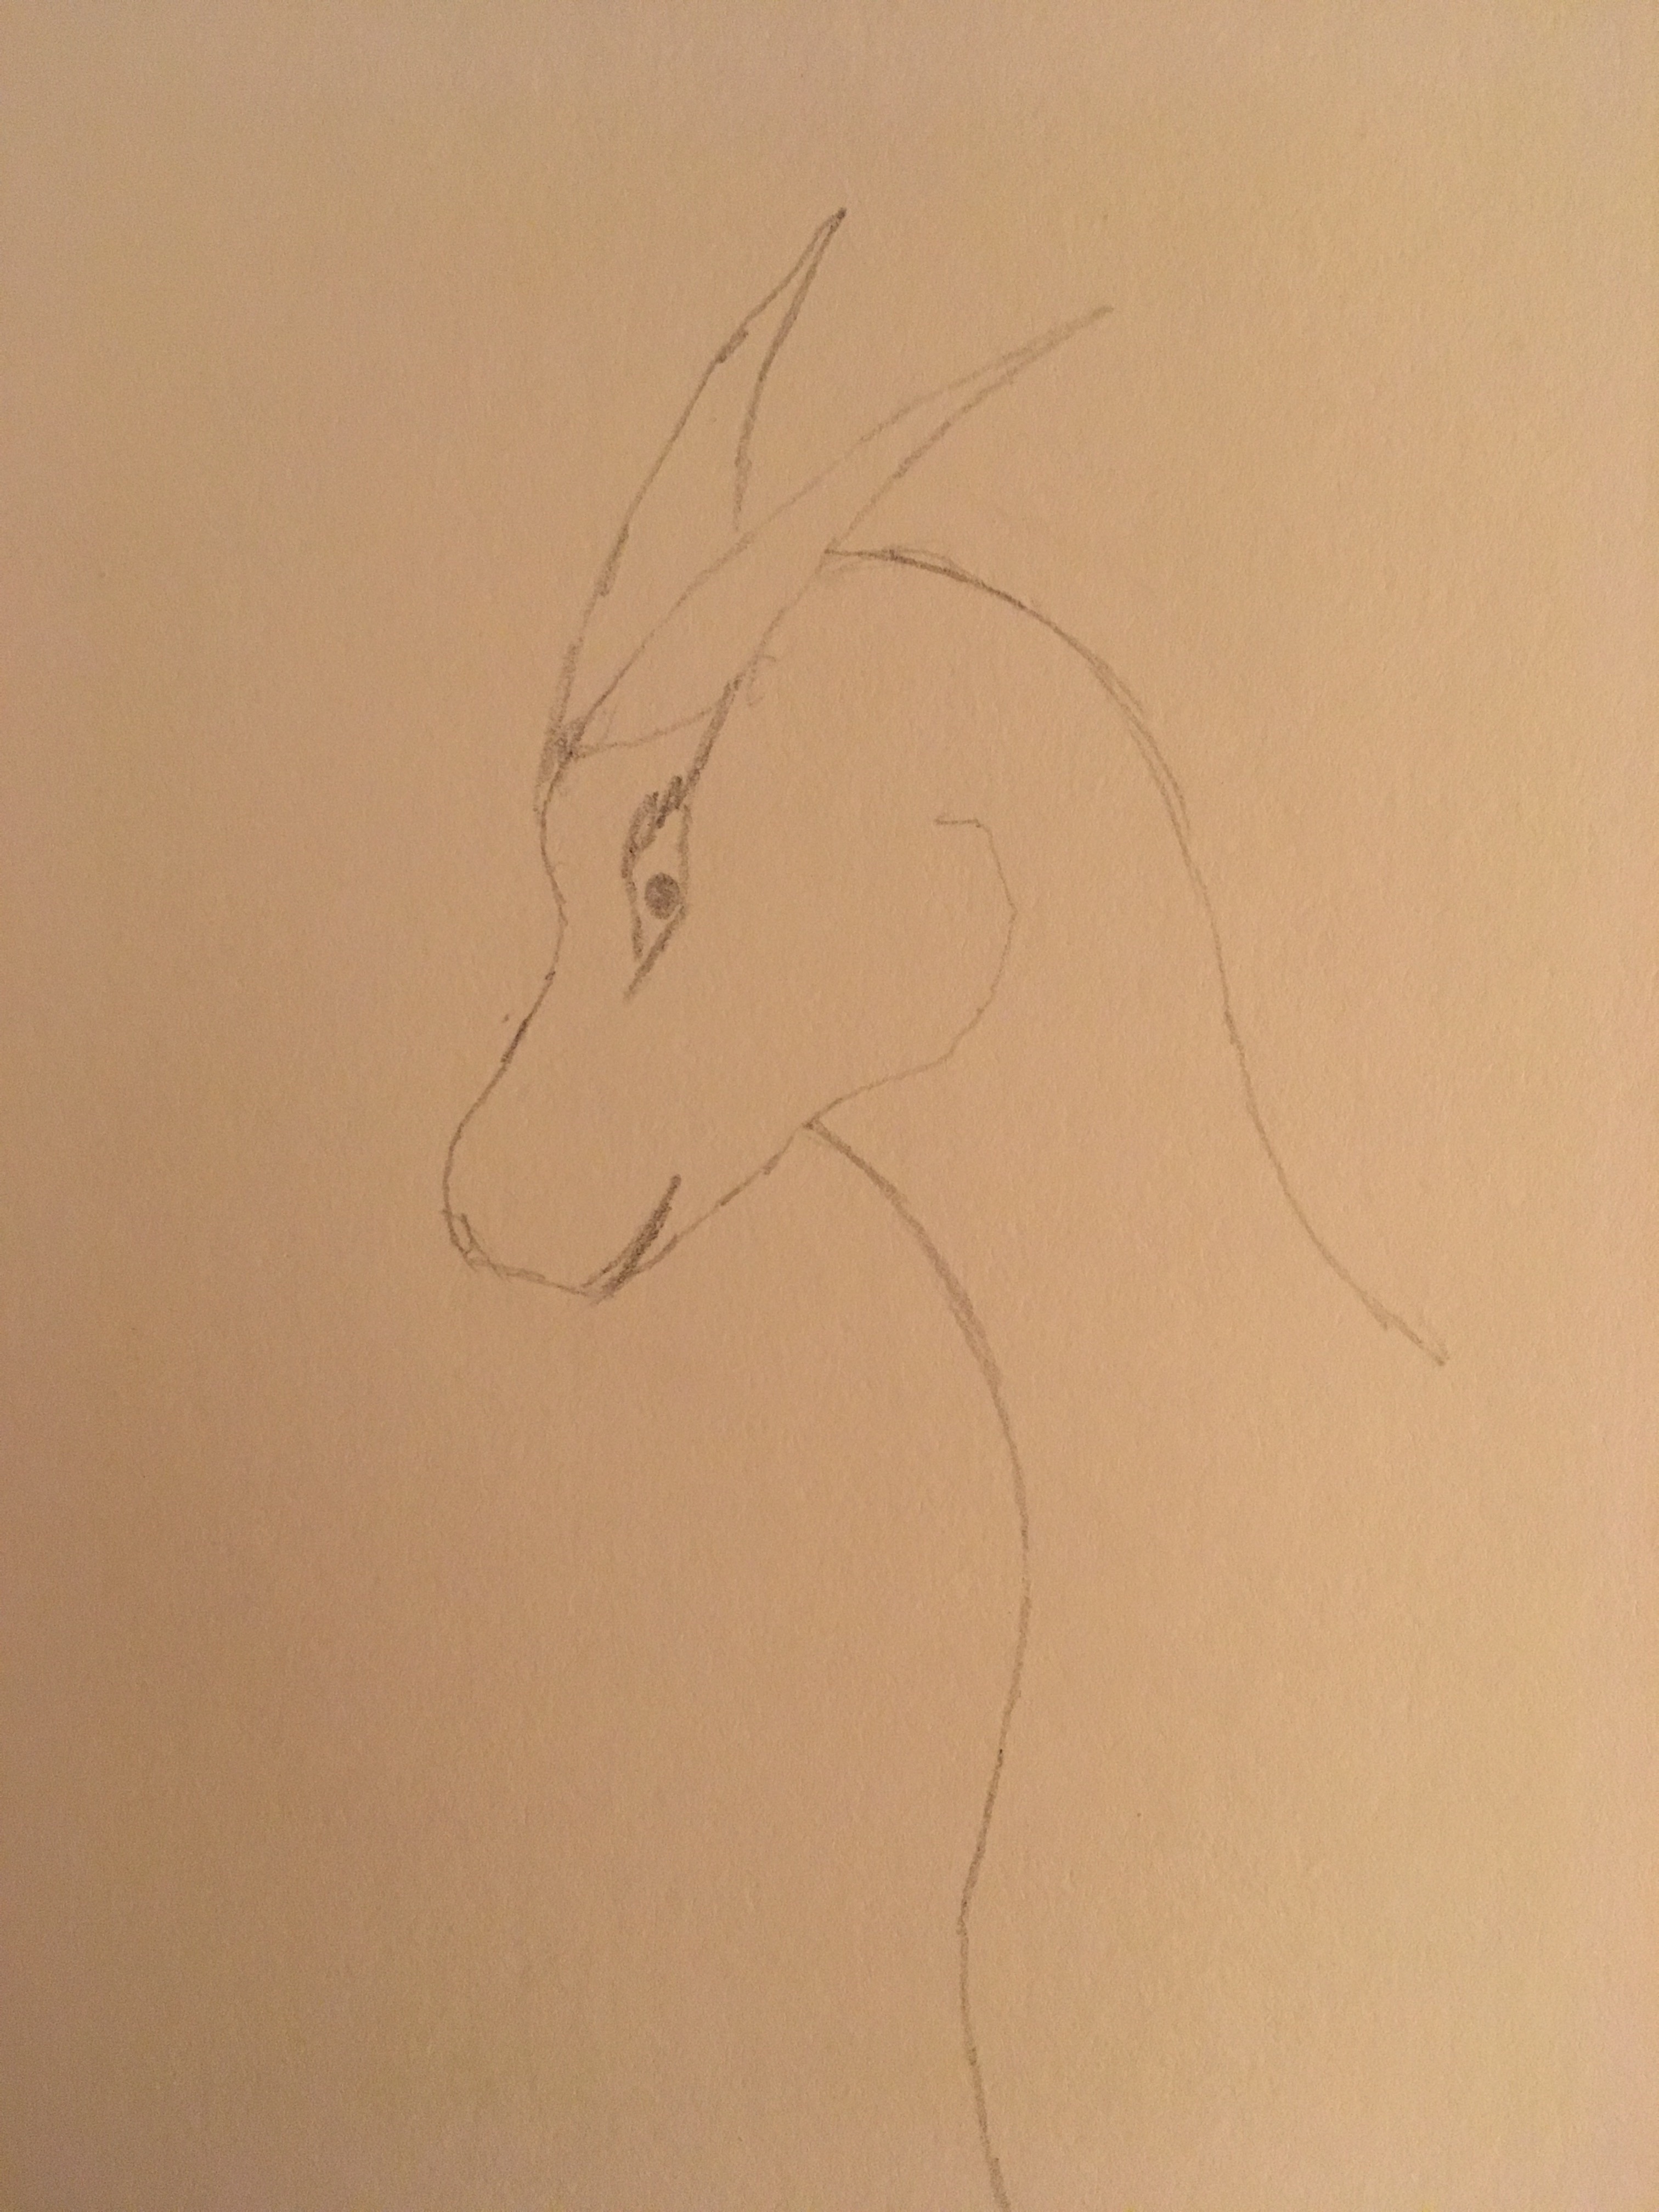 A sliver of dragon on the edge of a smile